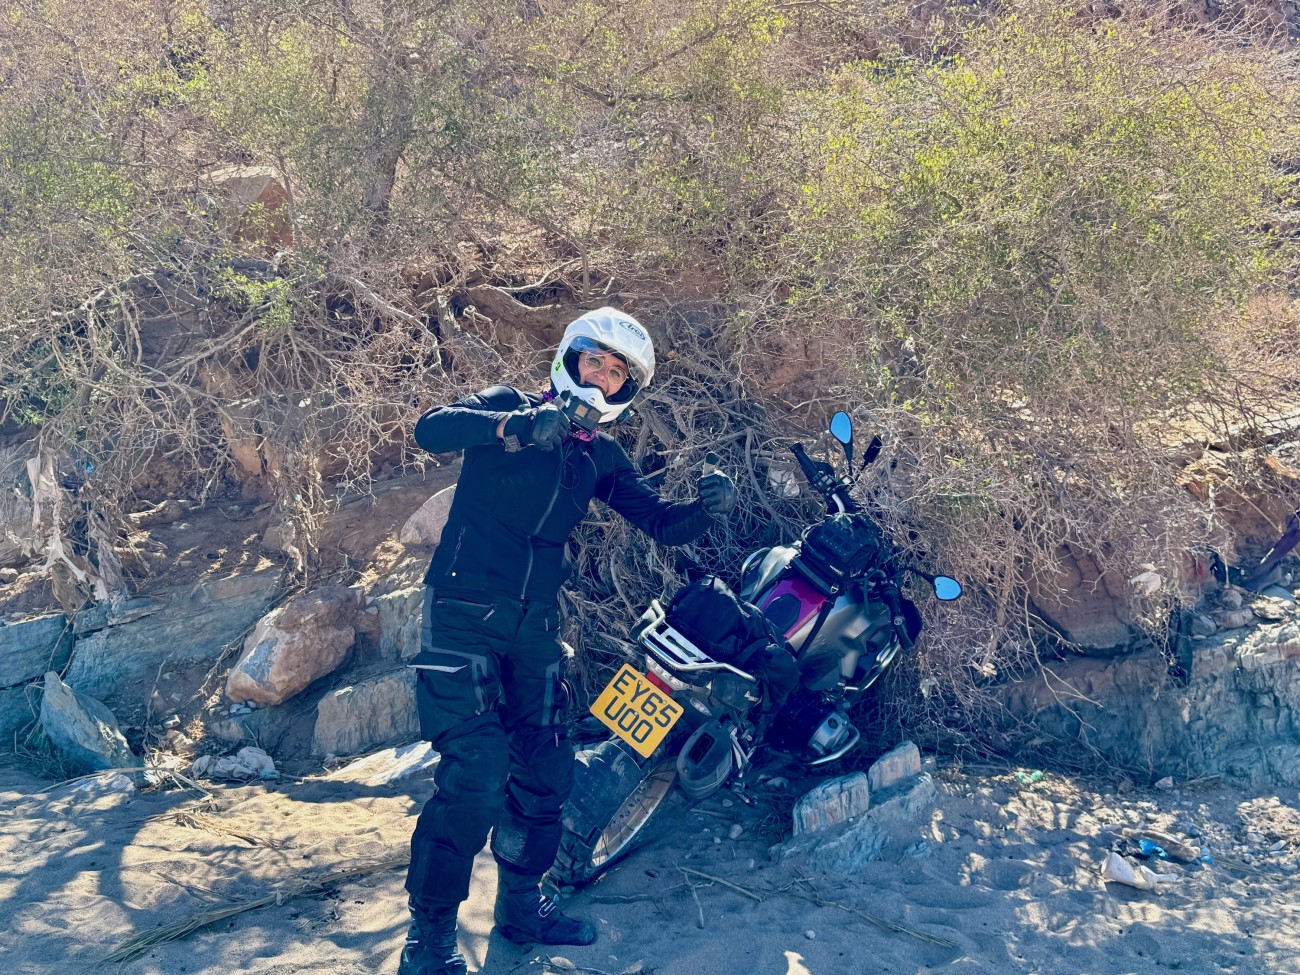 Sophie holding her thumbs up with a motorbike stuck in a bush behind her